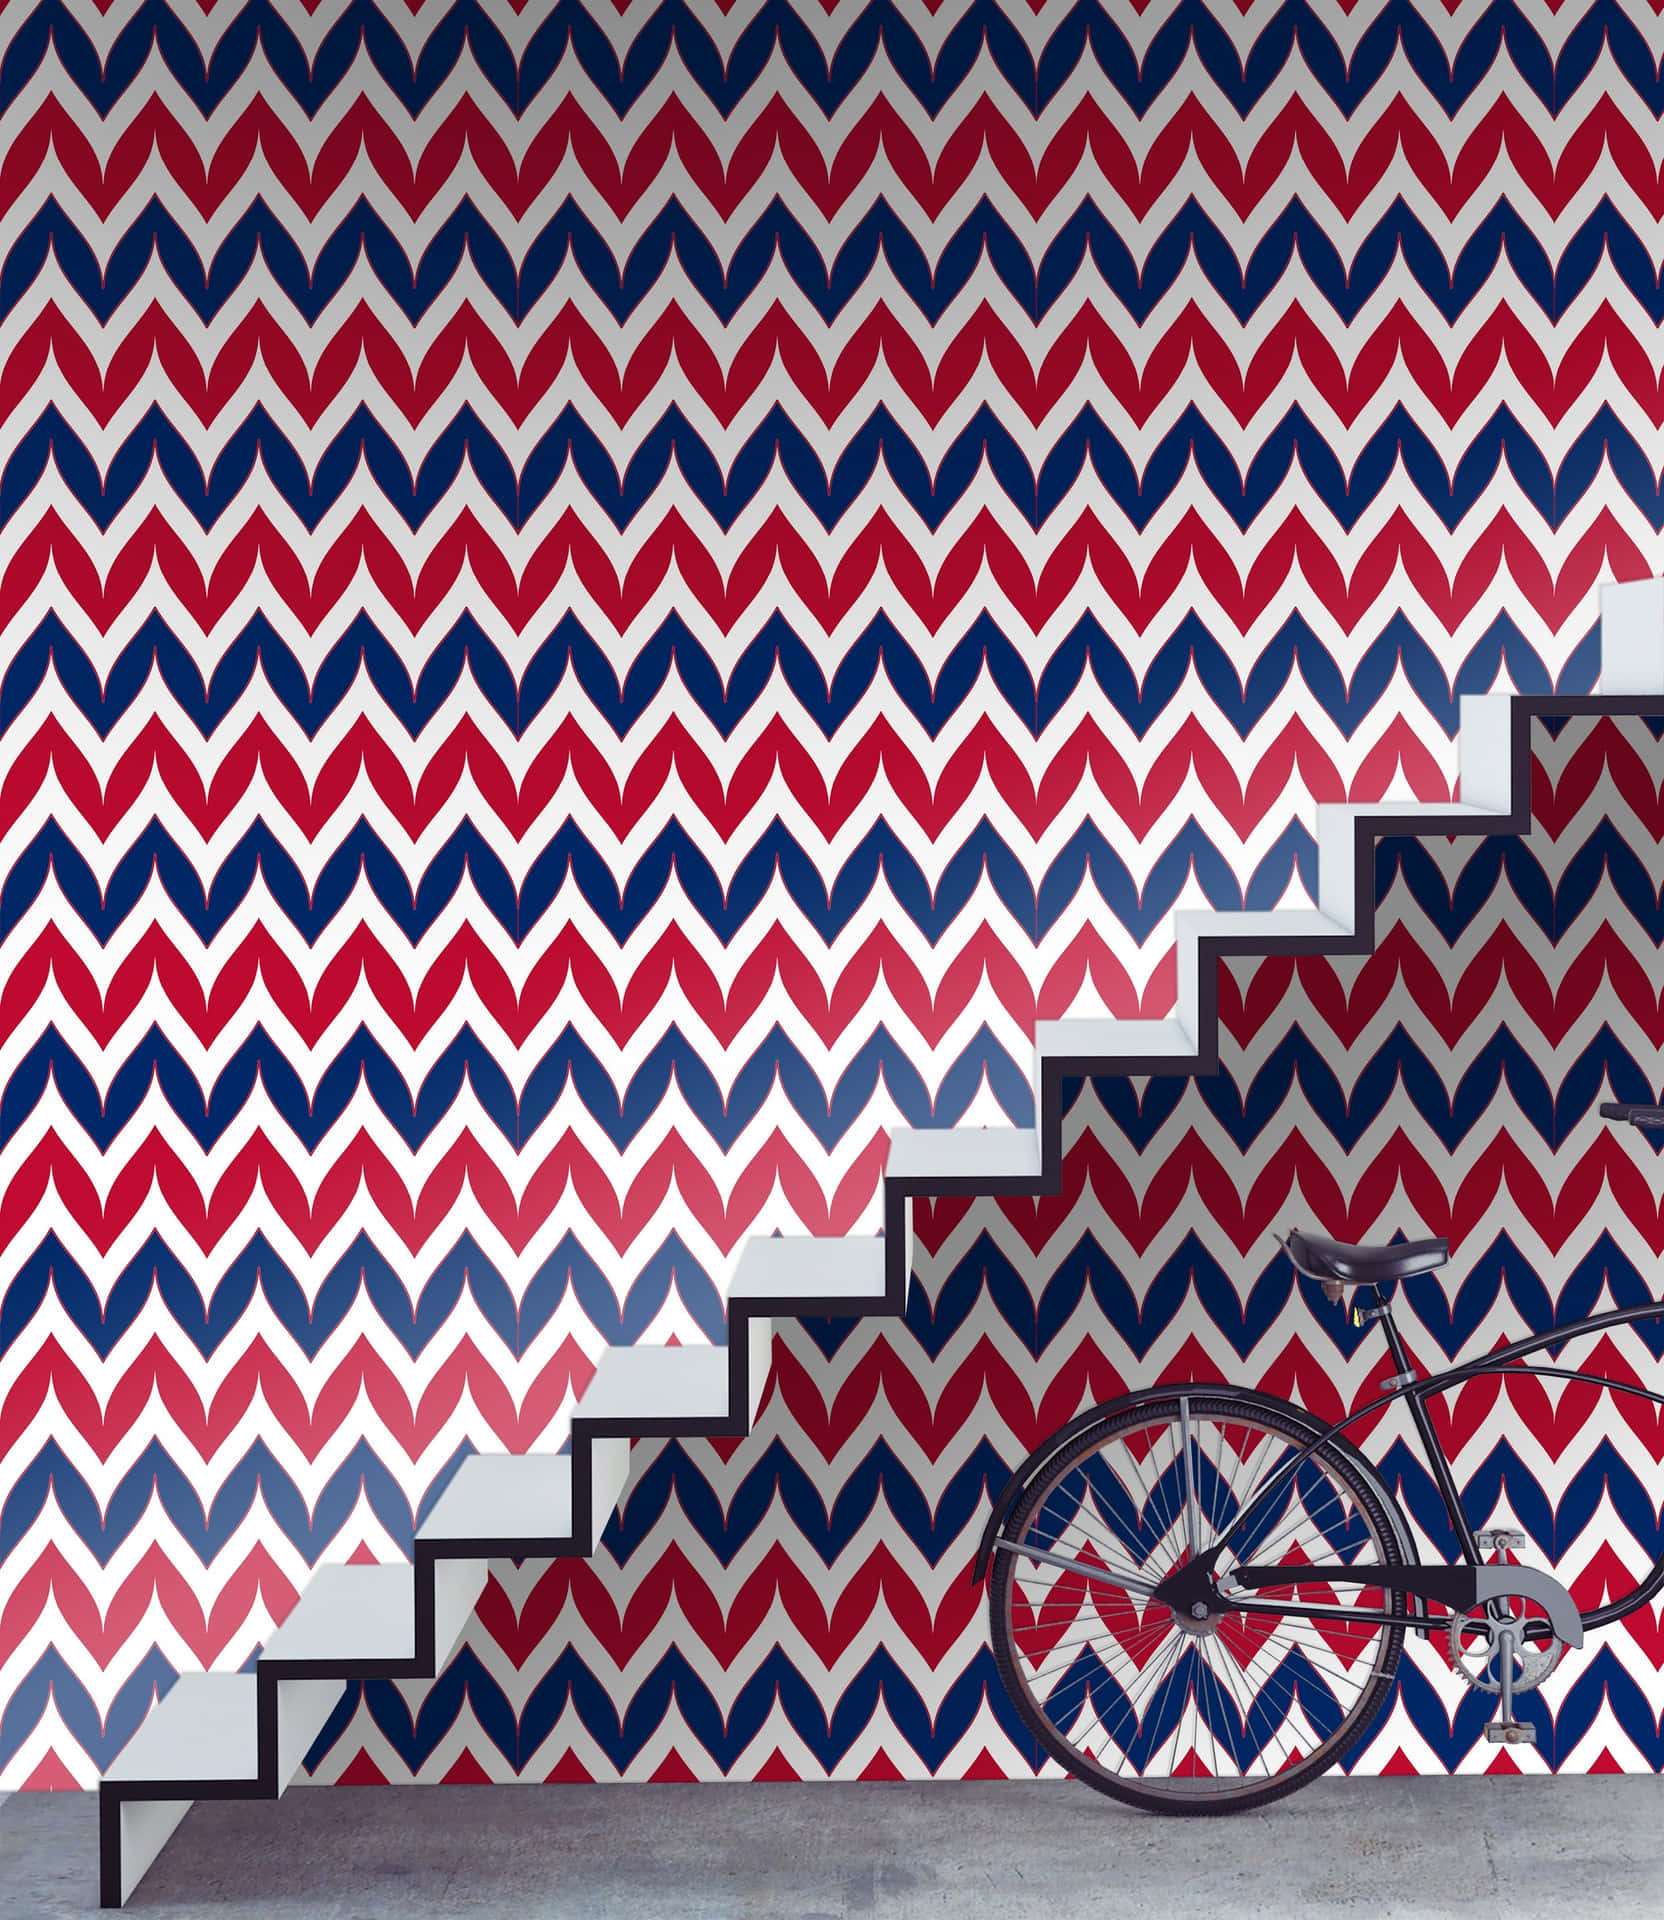 Patriotic Chevron Walland Staircasewith Bicycle Wallpaper